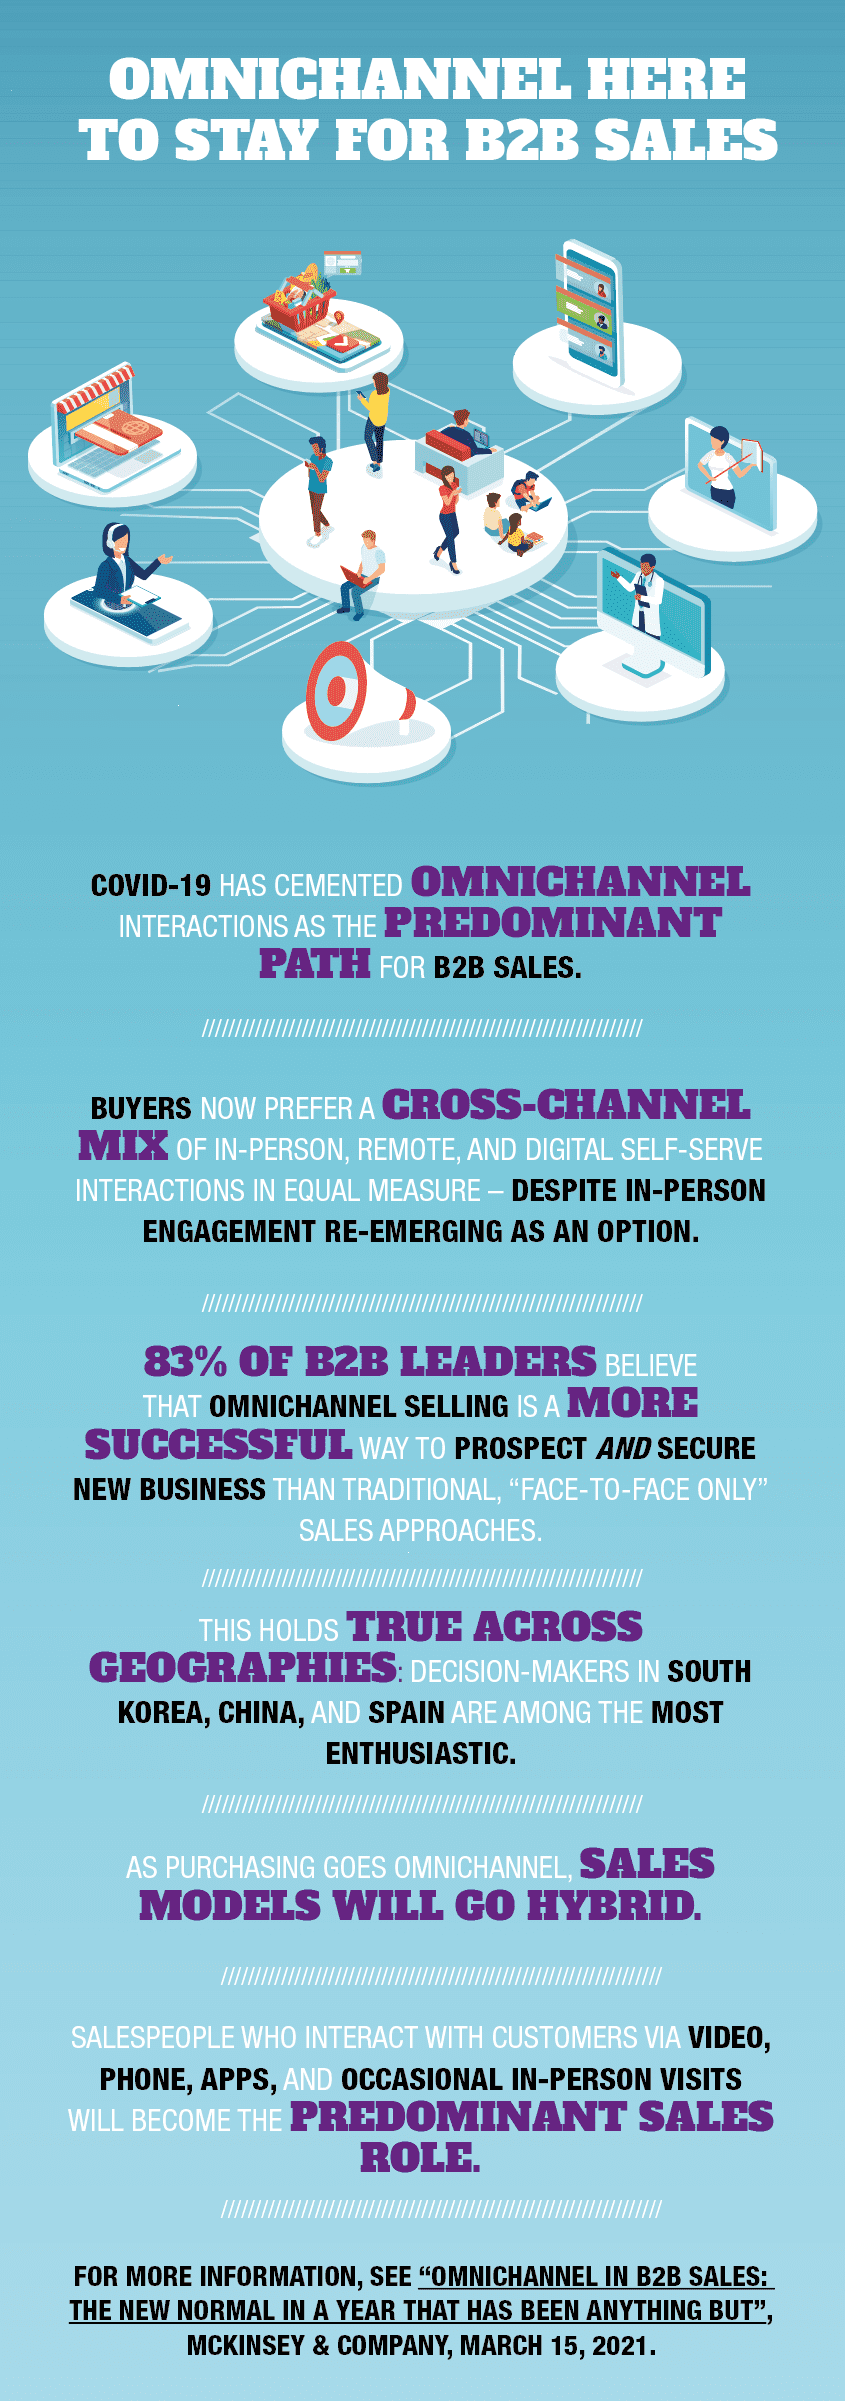 Omnichannel here to stay for B2B sales